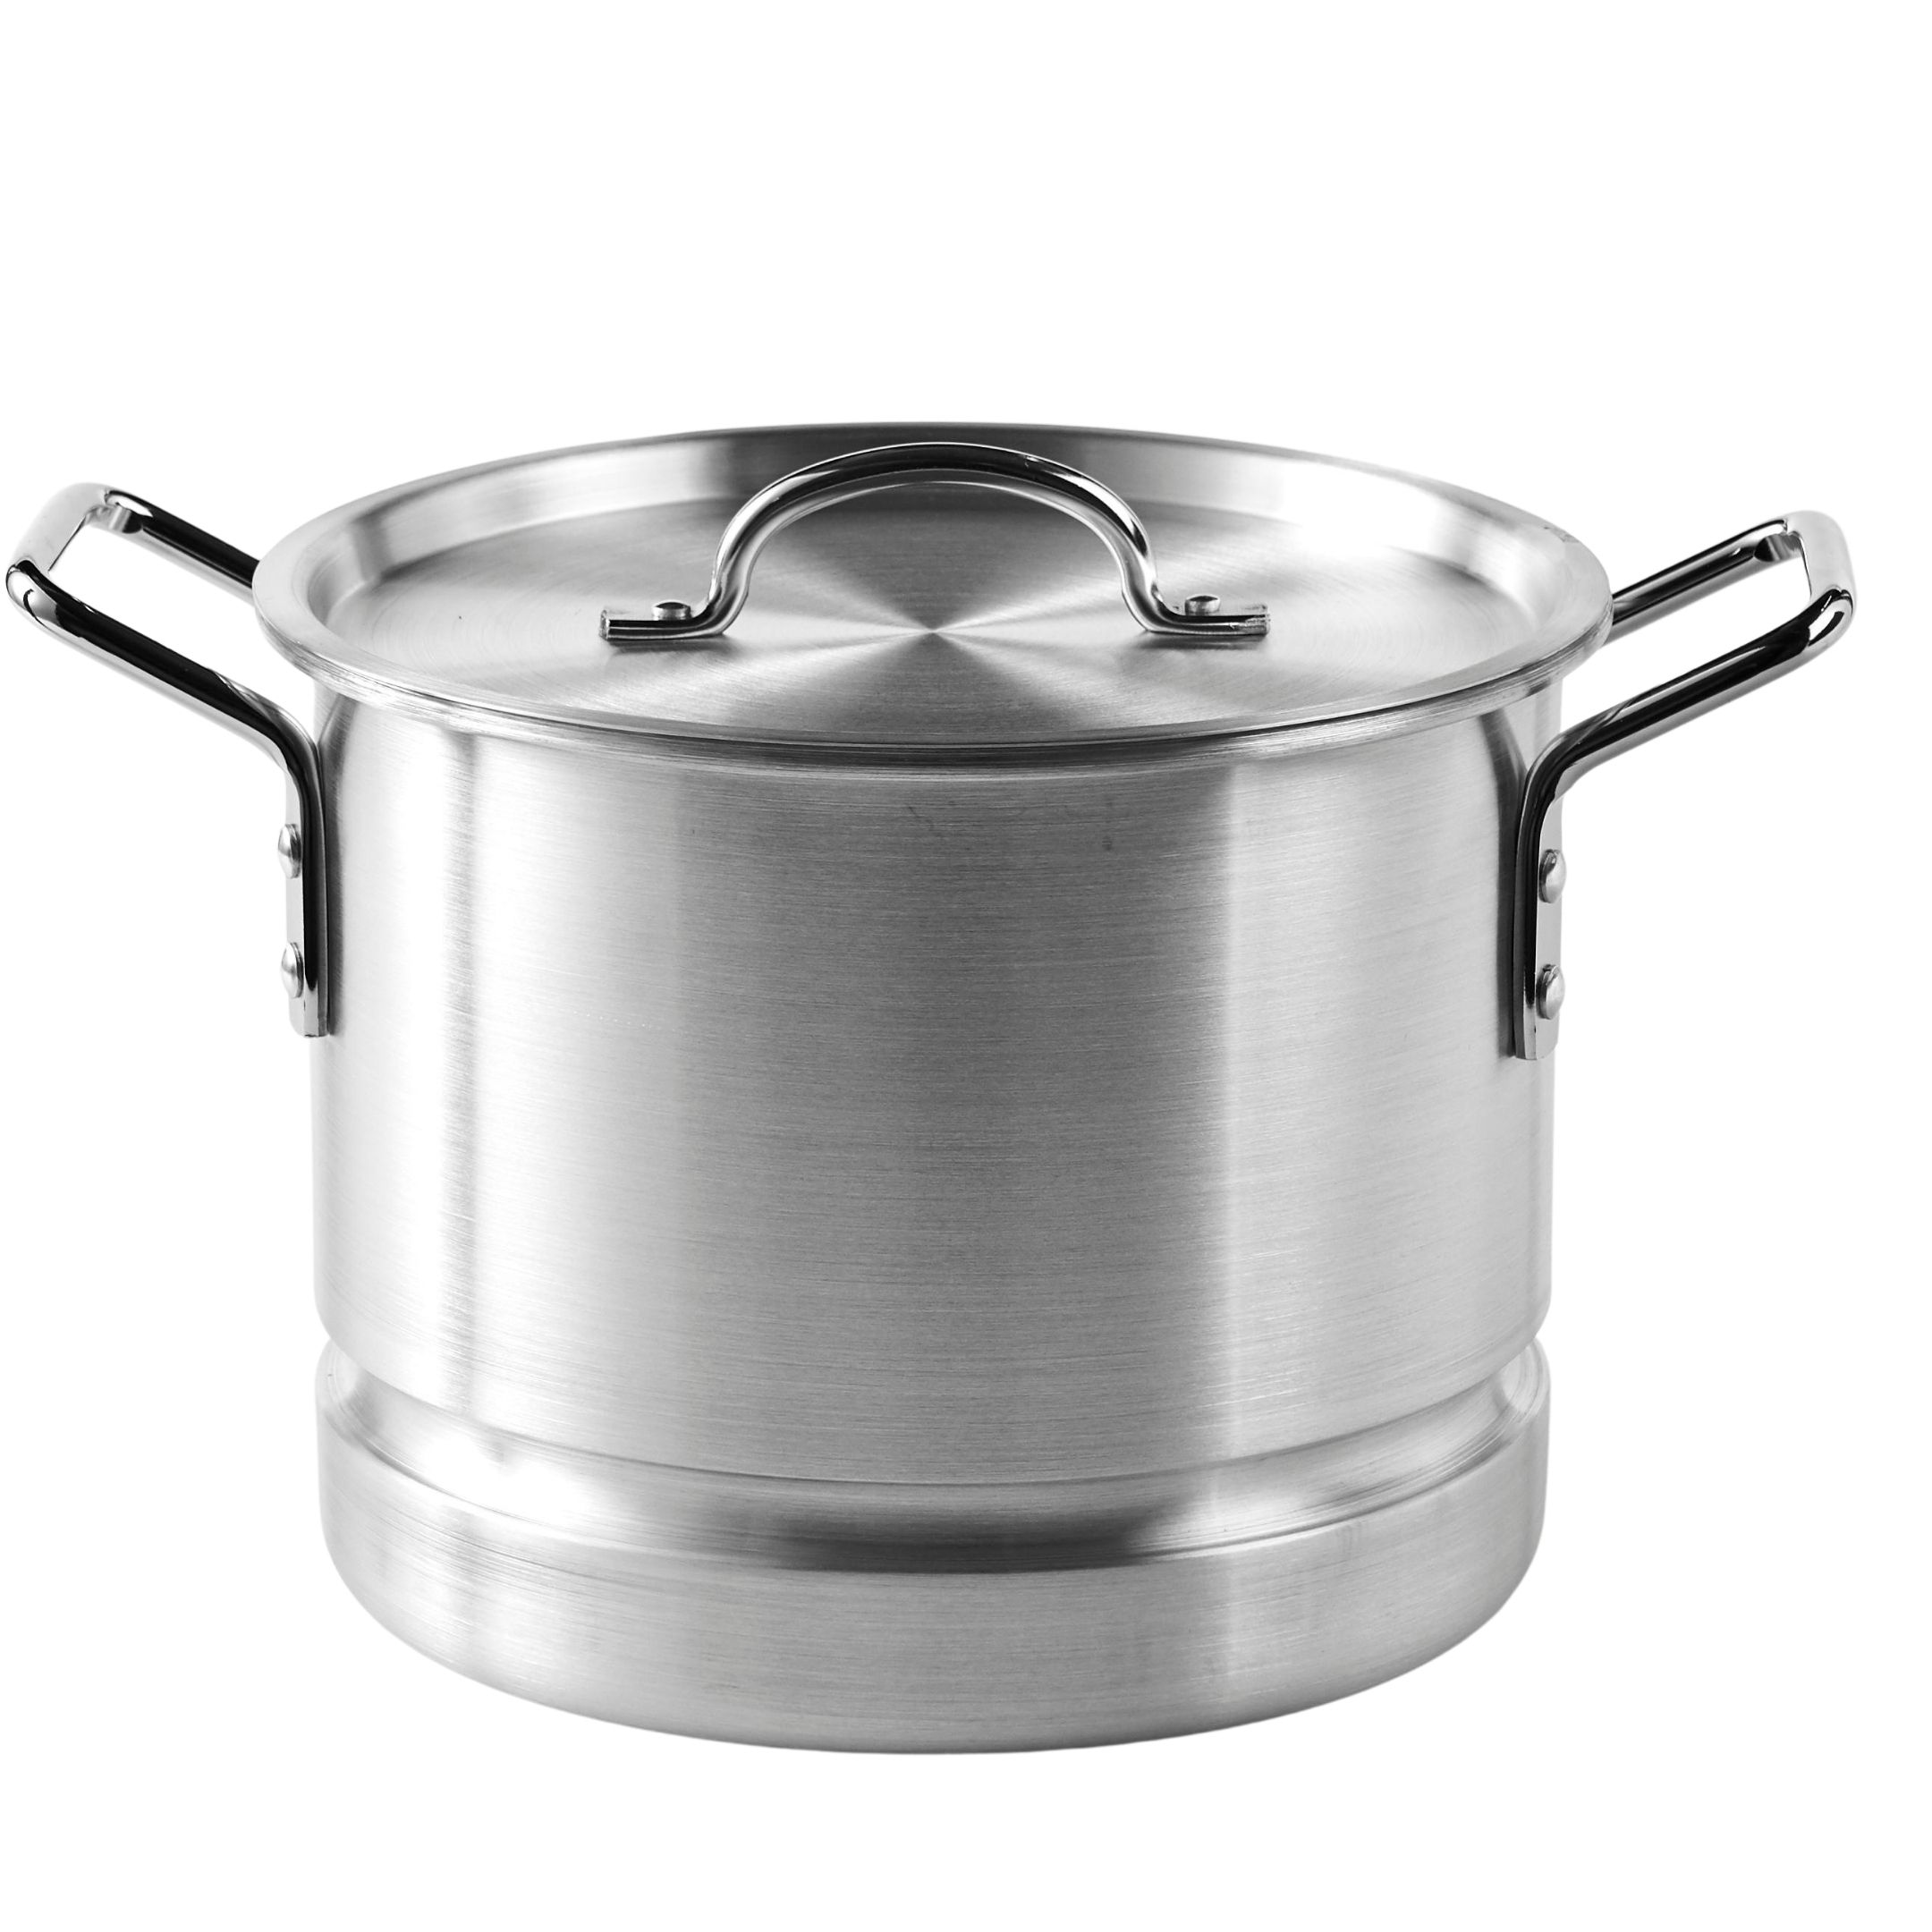 Imusa 32 Quart Aluminum Steamer or Stockpot with Lid and Removable Rack - image 1 of 11